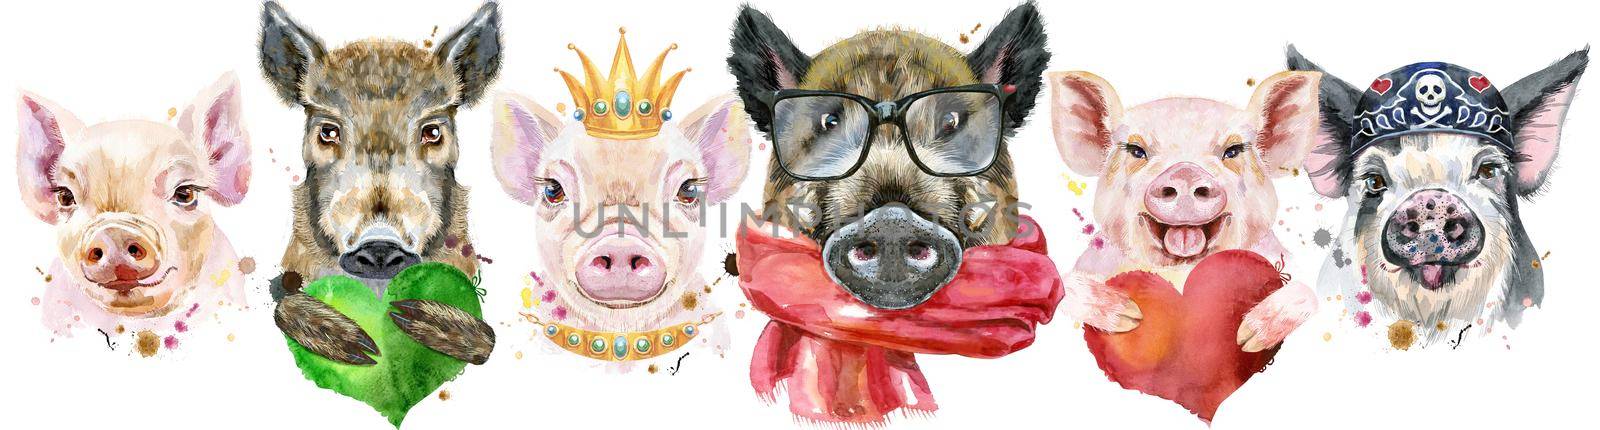 Border from pigs. Watercolor portraits of pigs and boars by NataOmsk